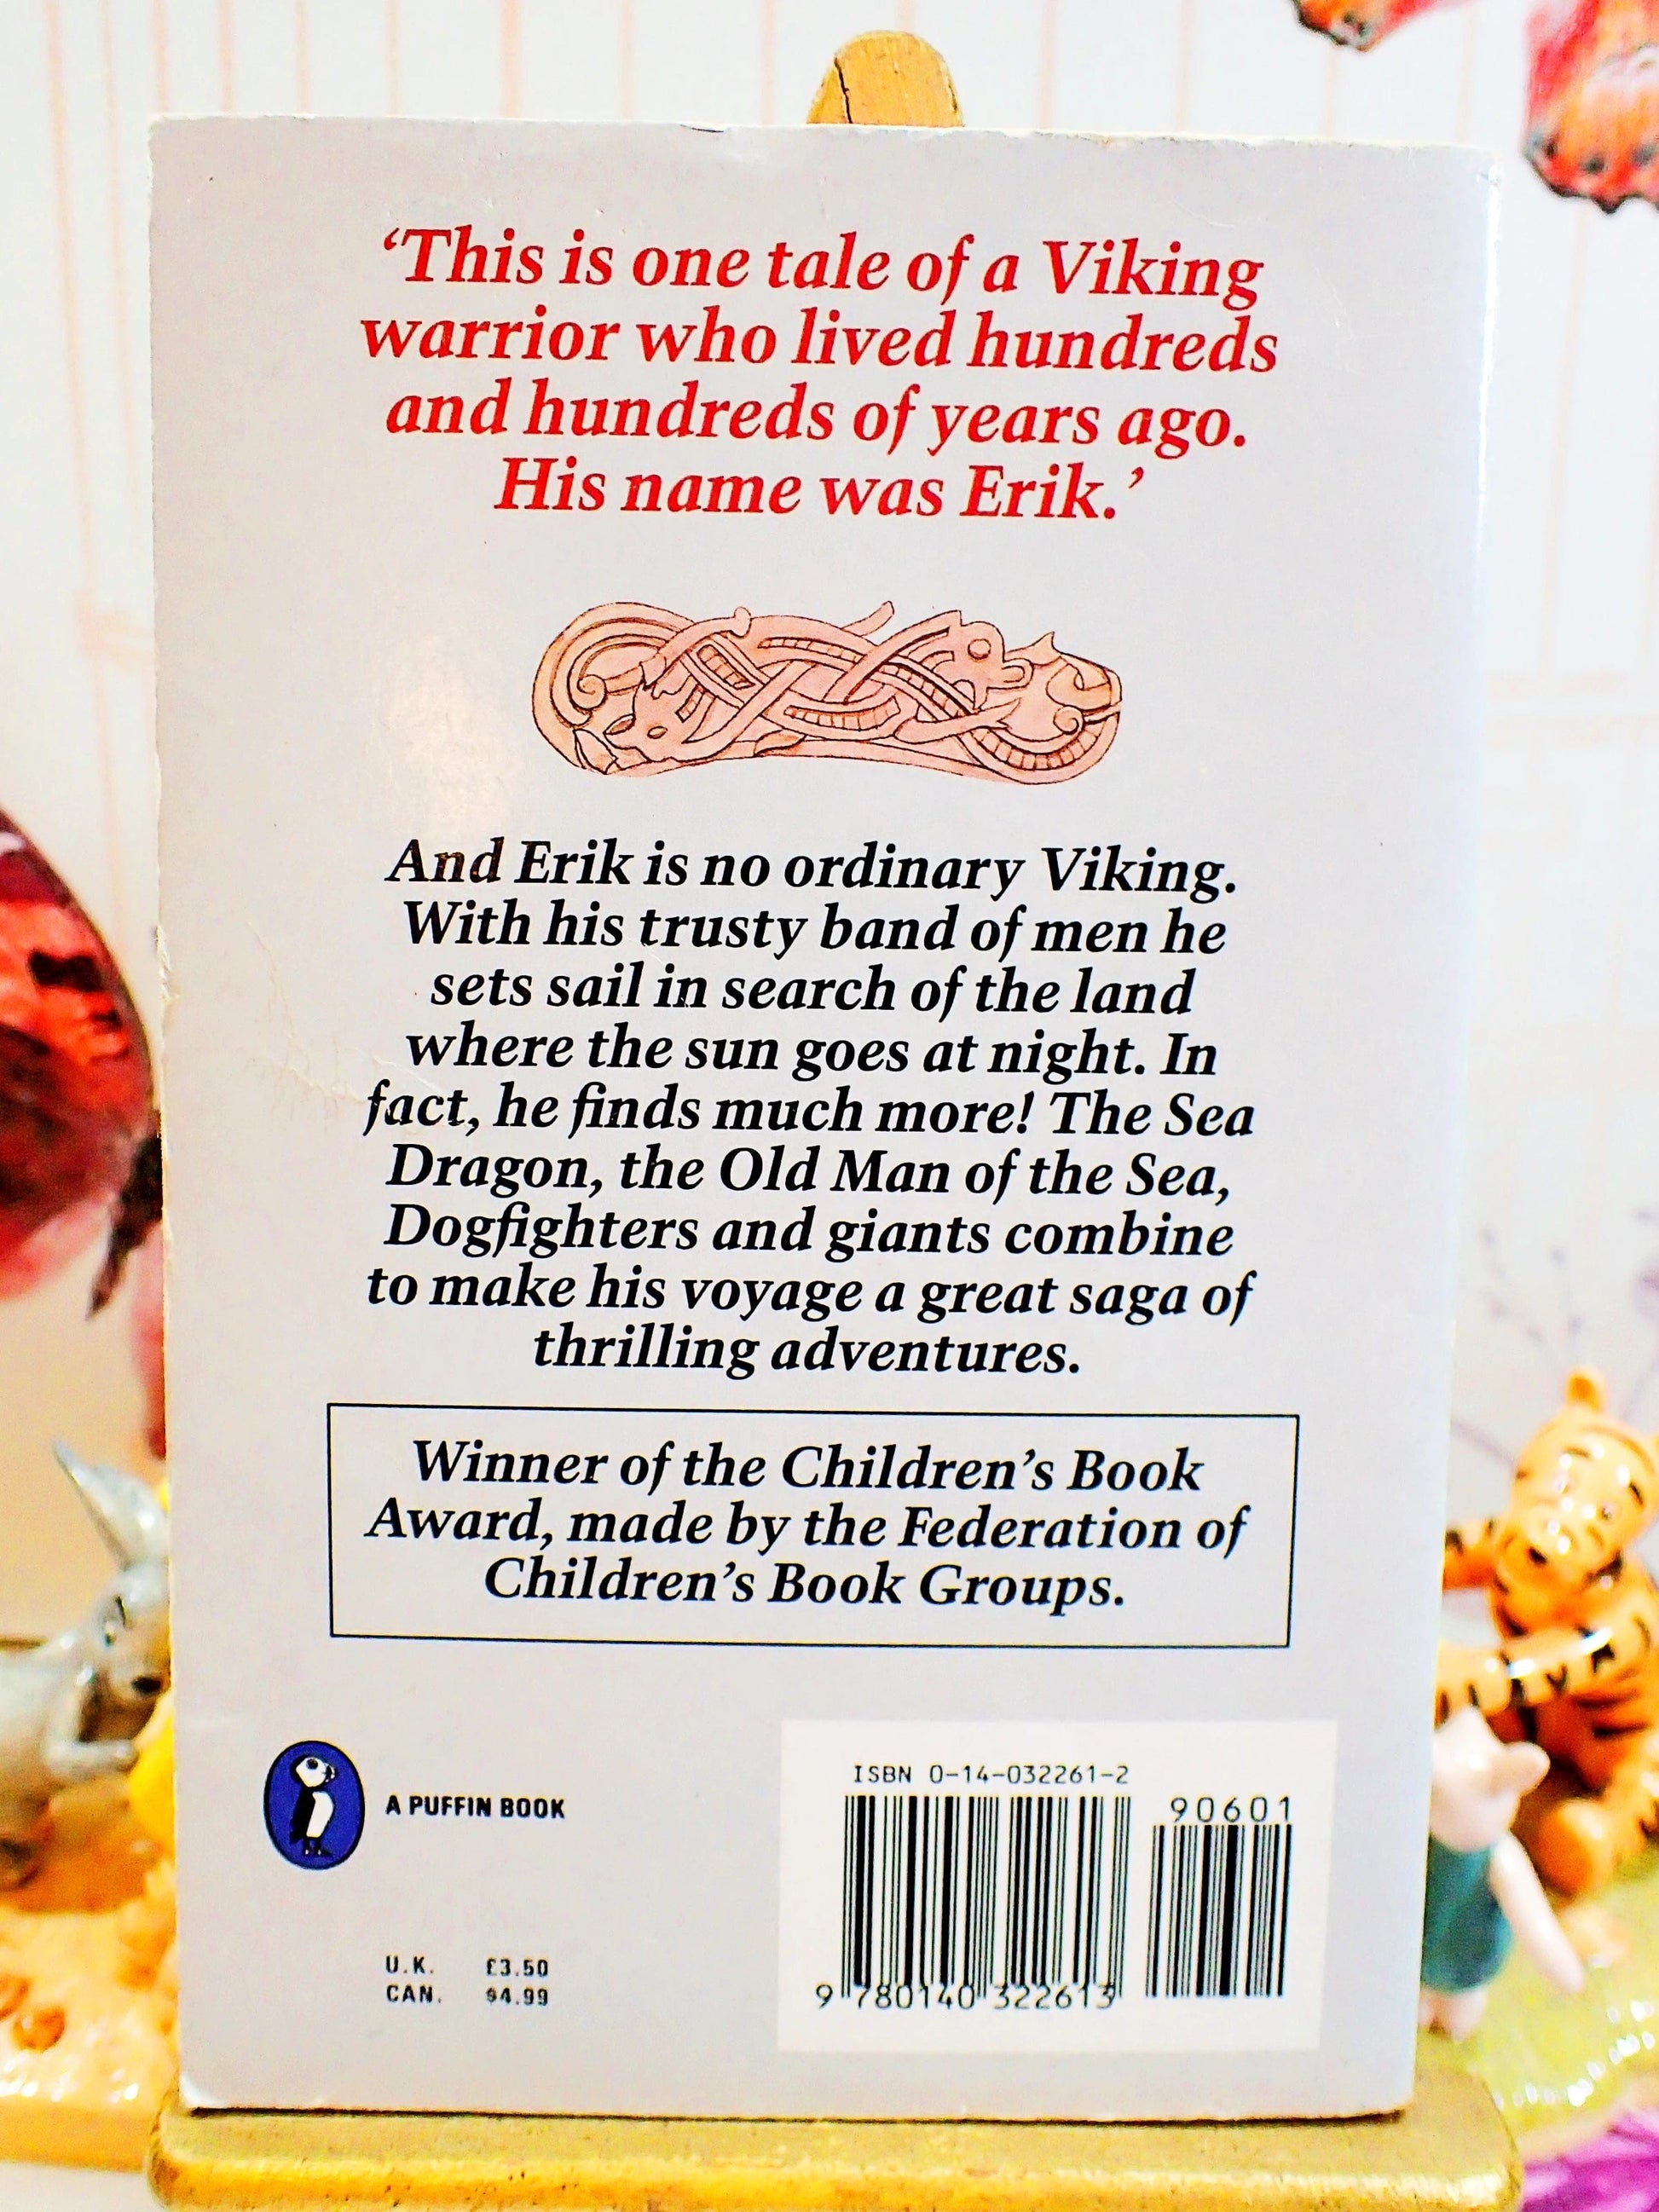 Back cover of The Saga of Erik the Viking by Terry Jones Vintage Puffin Children's Book 1988 showing a Viking Ship sailing against a grey ground with celtic ornamentation. Text: This is one tale of a Viking warrior who lived hundreds...